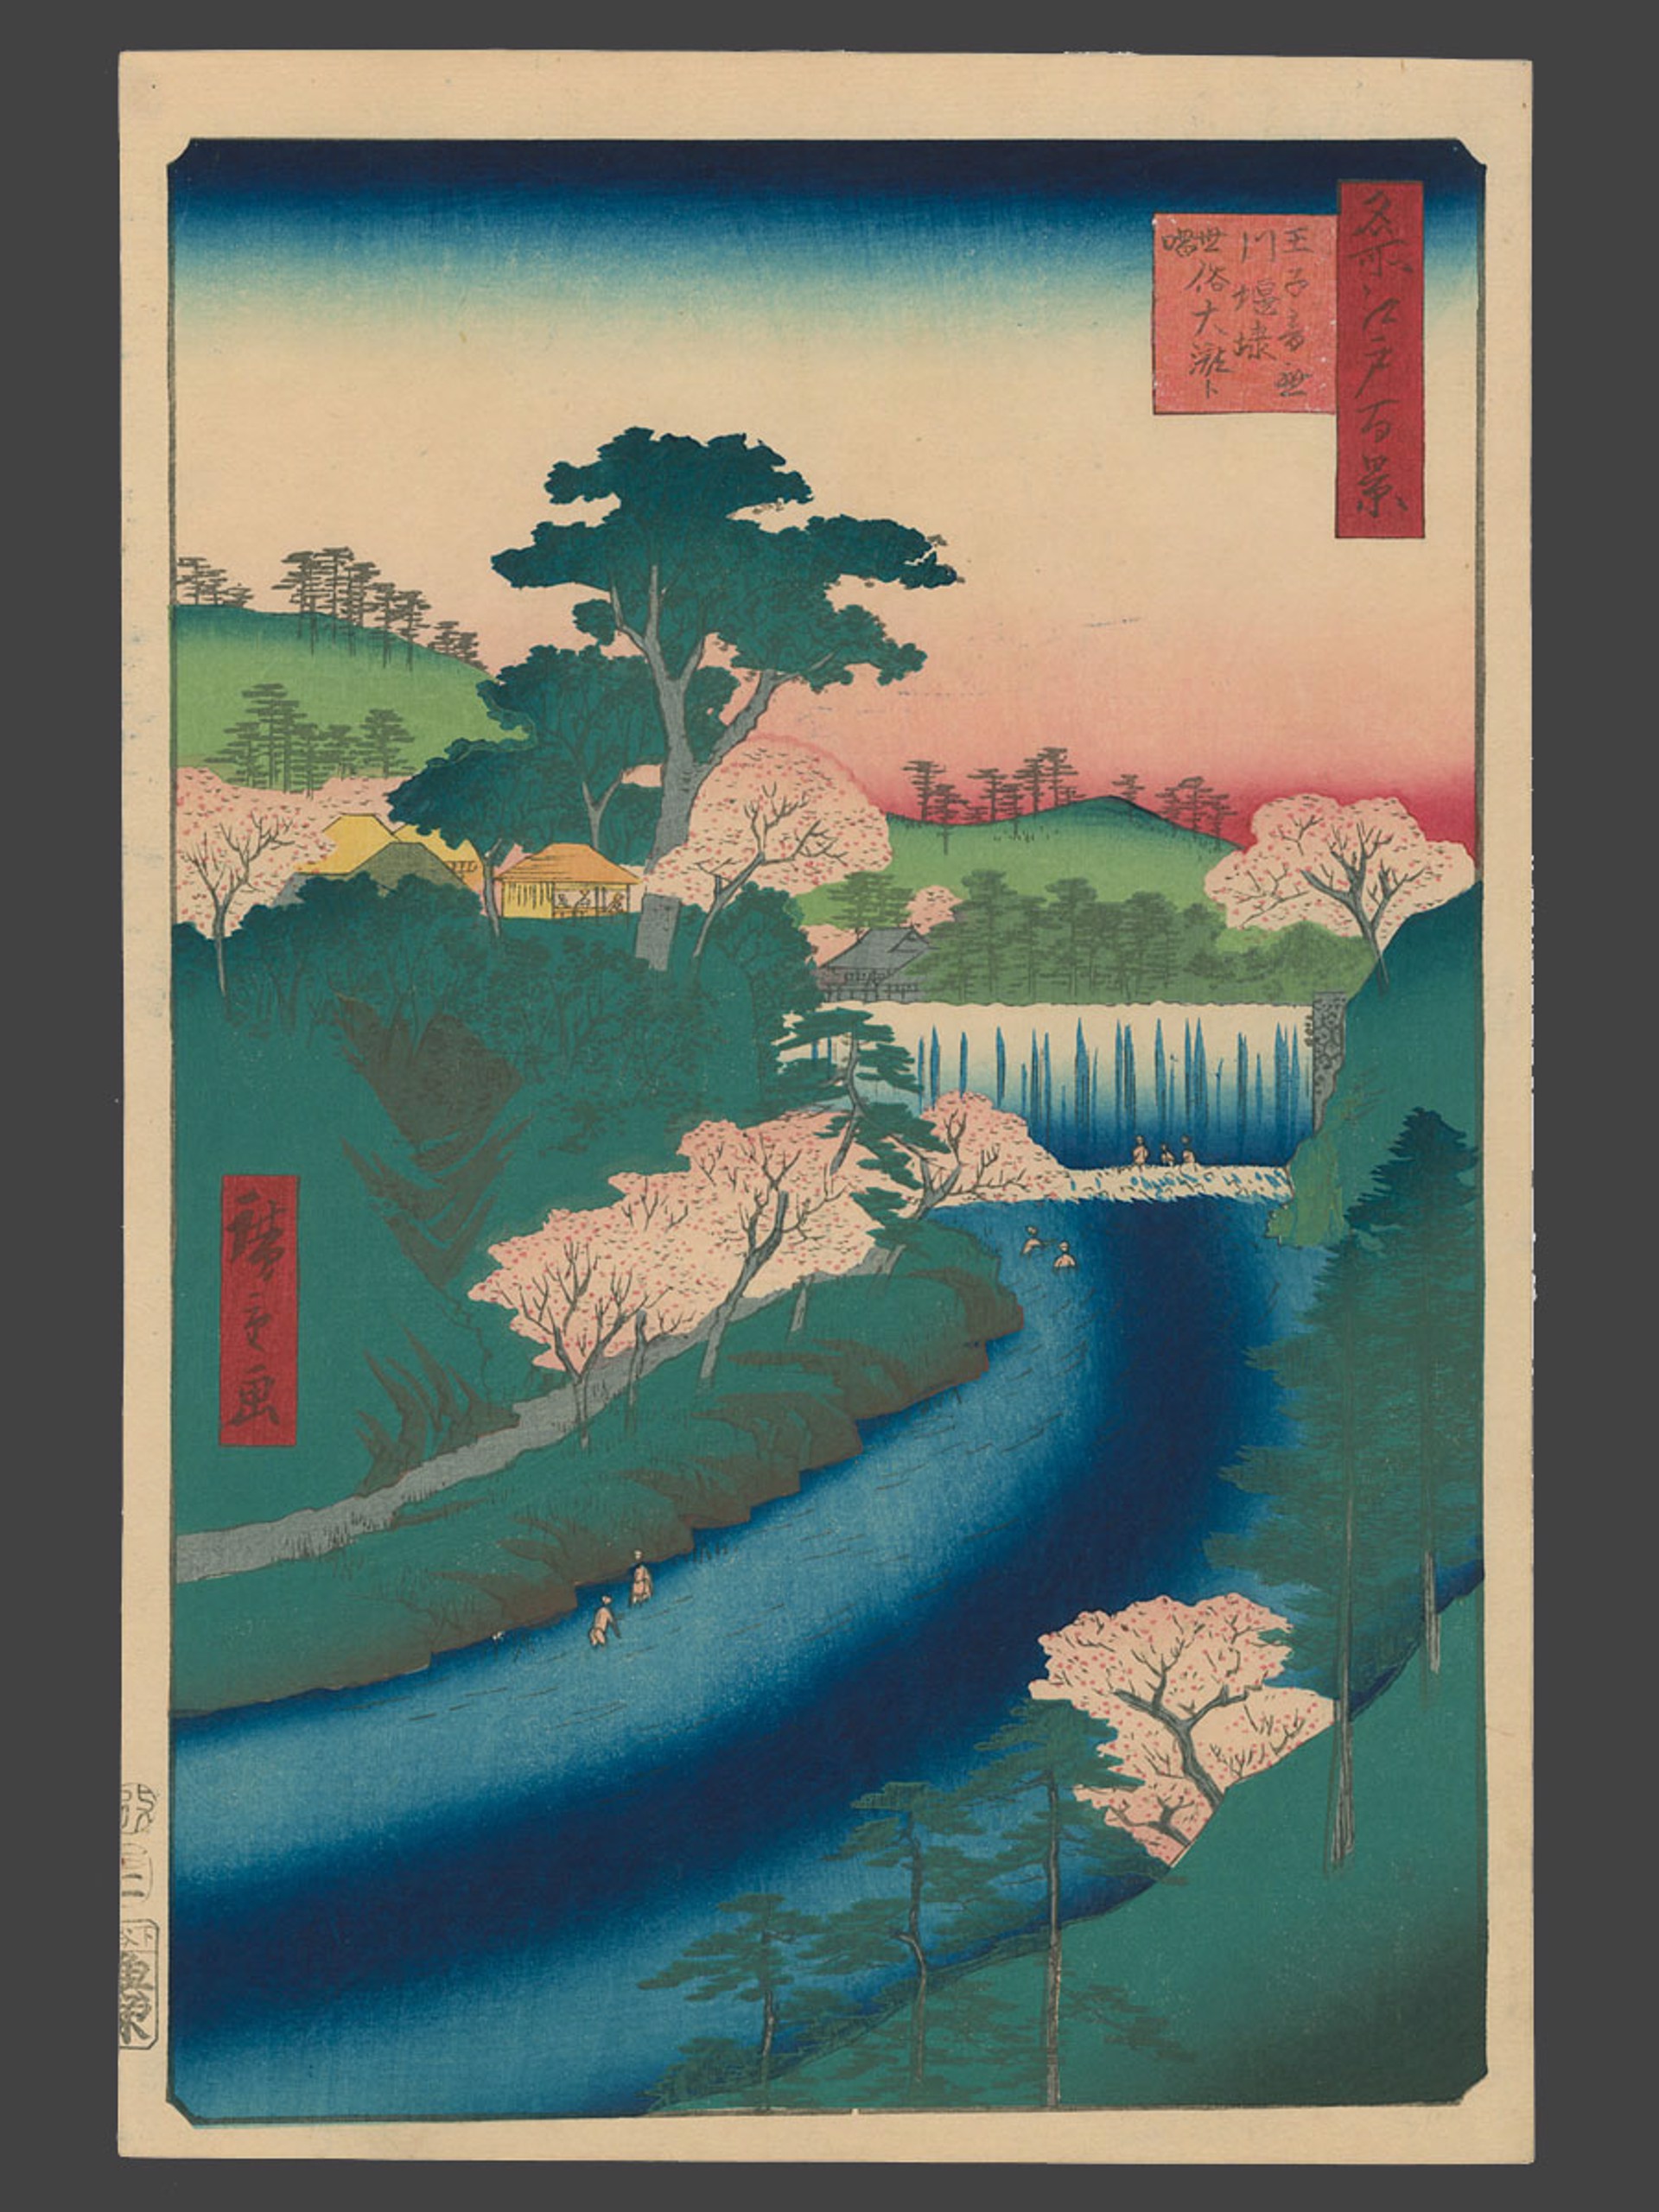 #19 Dam on the Otonashi River at Oji, popularly Known as "The Great Waterfall" 100 Views of Edo by Hiroshige